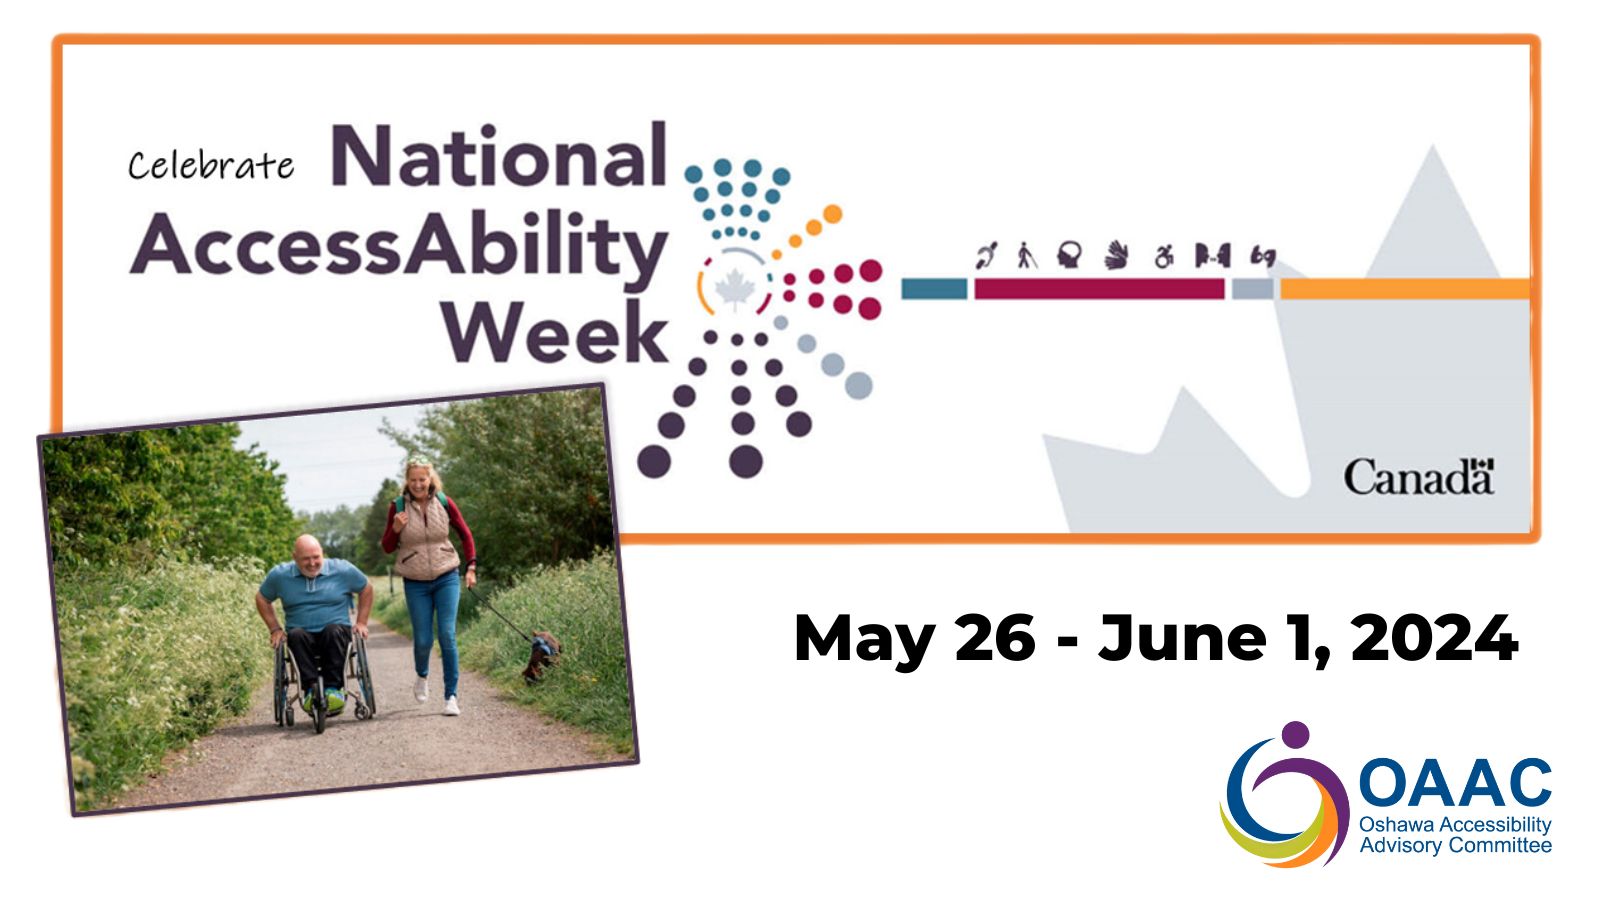 National AccessAbility Week May 26 - June 1, 2024